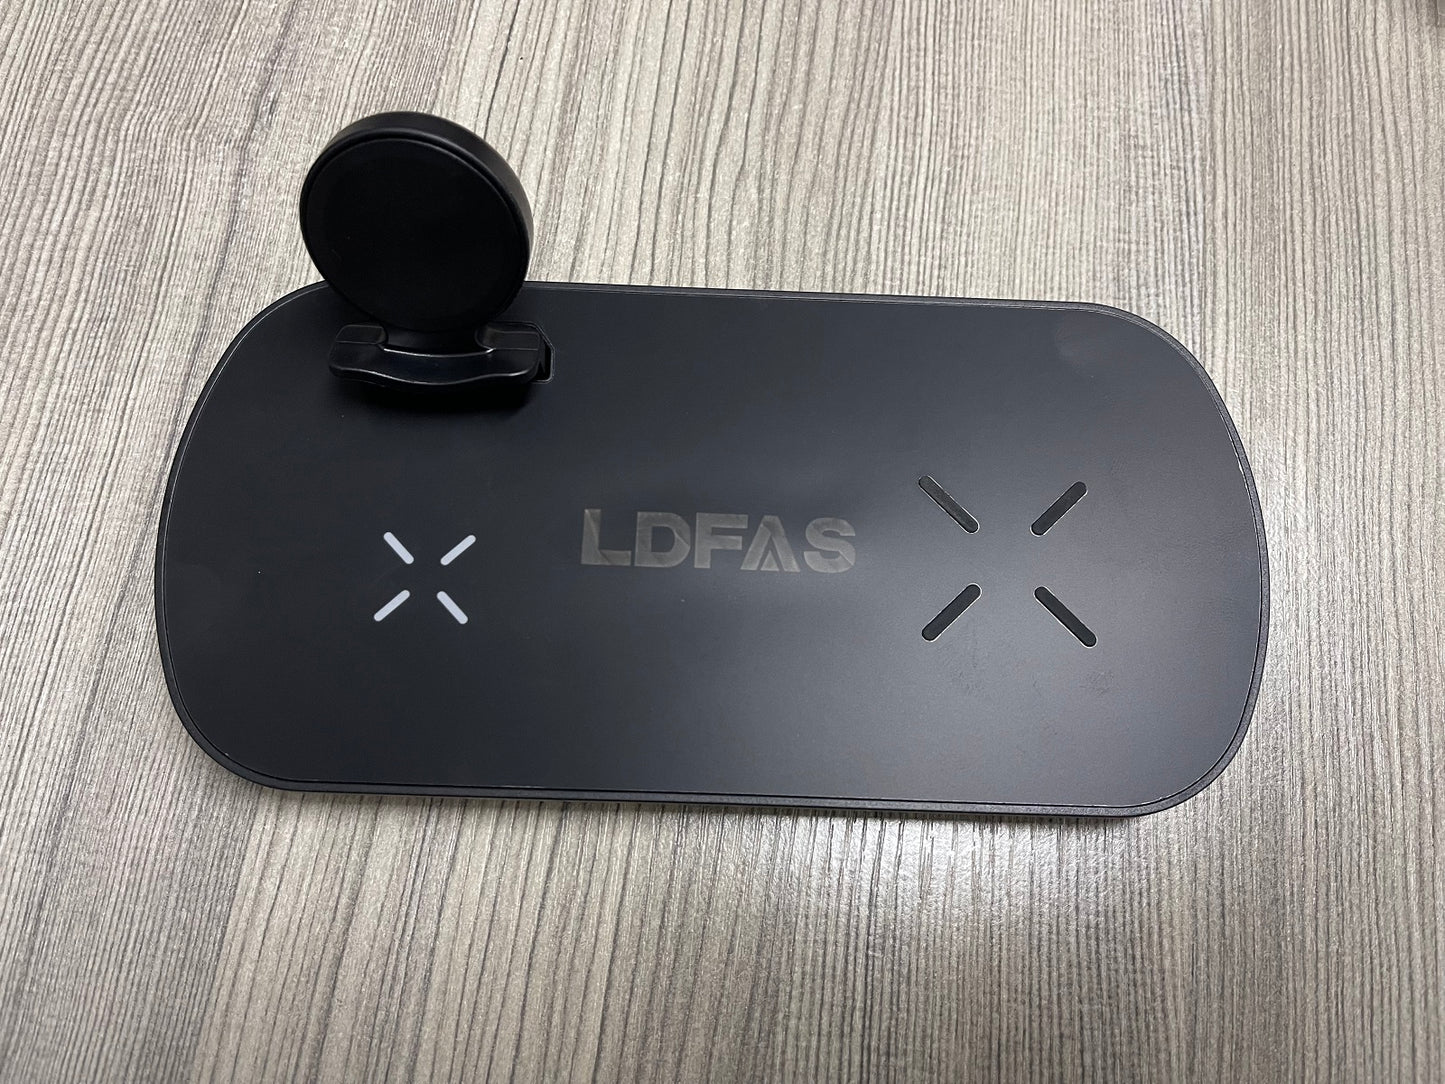 LDFAS Battery chargers, Wireless chargers Stand for cellphone, galaxy watch5